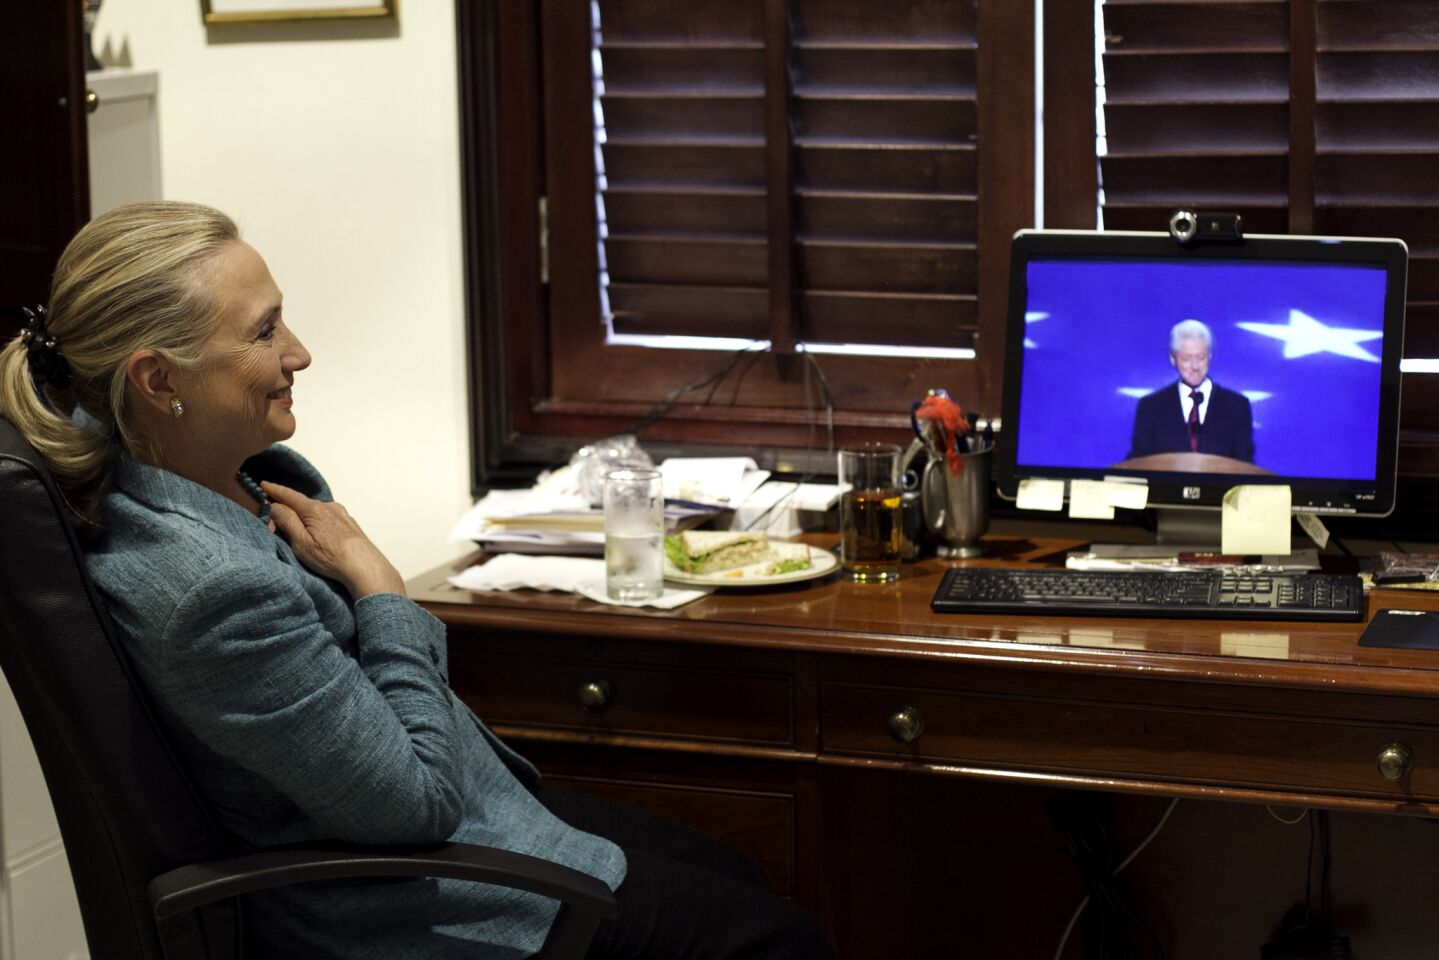 This photo, courtesy of the Department of State, shows Secretary Hillary Clinton watching her husband Bill's nomination of President Obama during the Democratic convention in Charlotte, N.C. at the residence of the U.S. ambassador to Timor Leste.